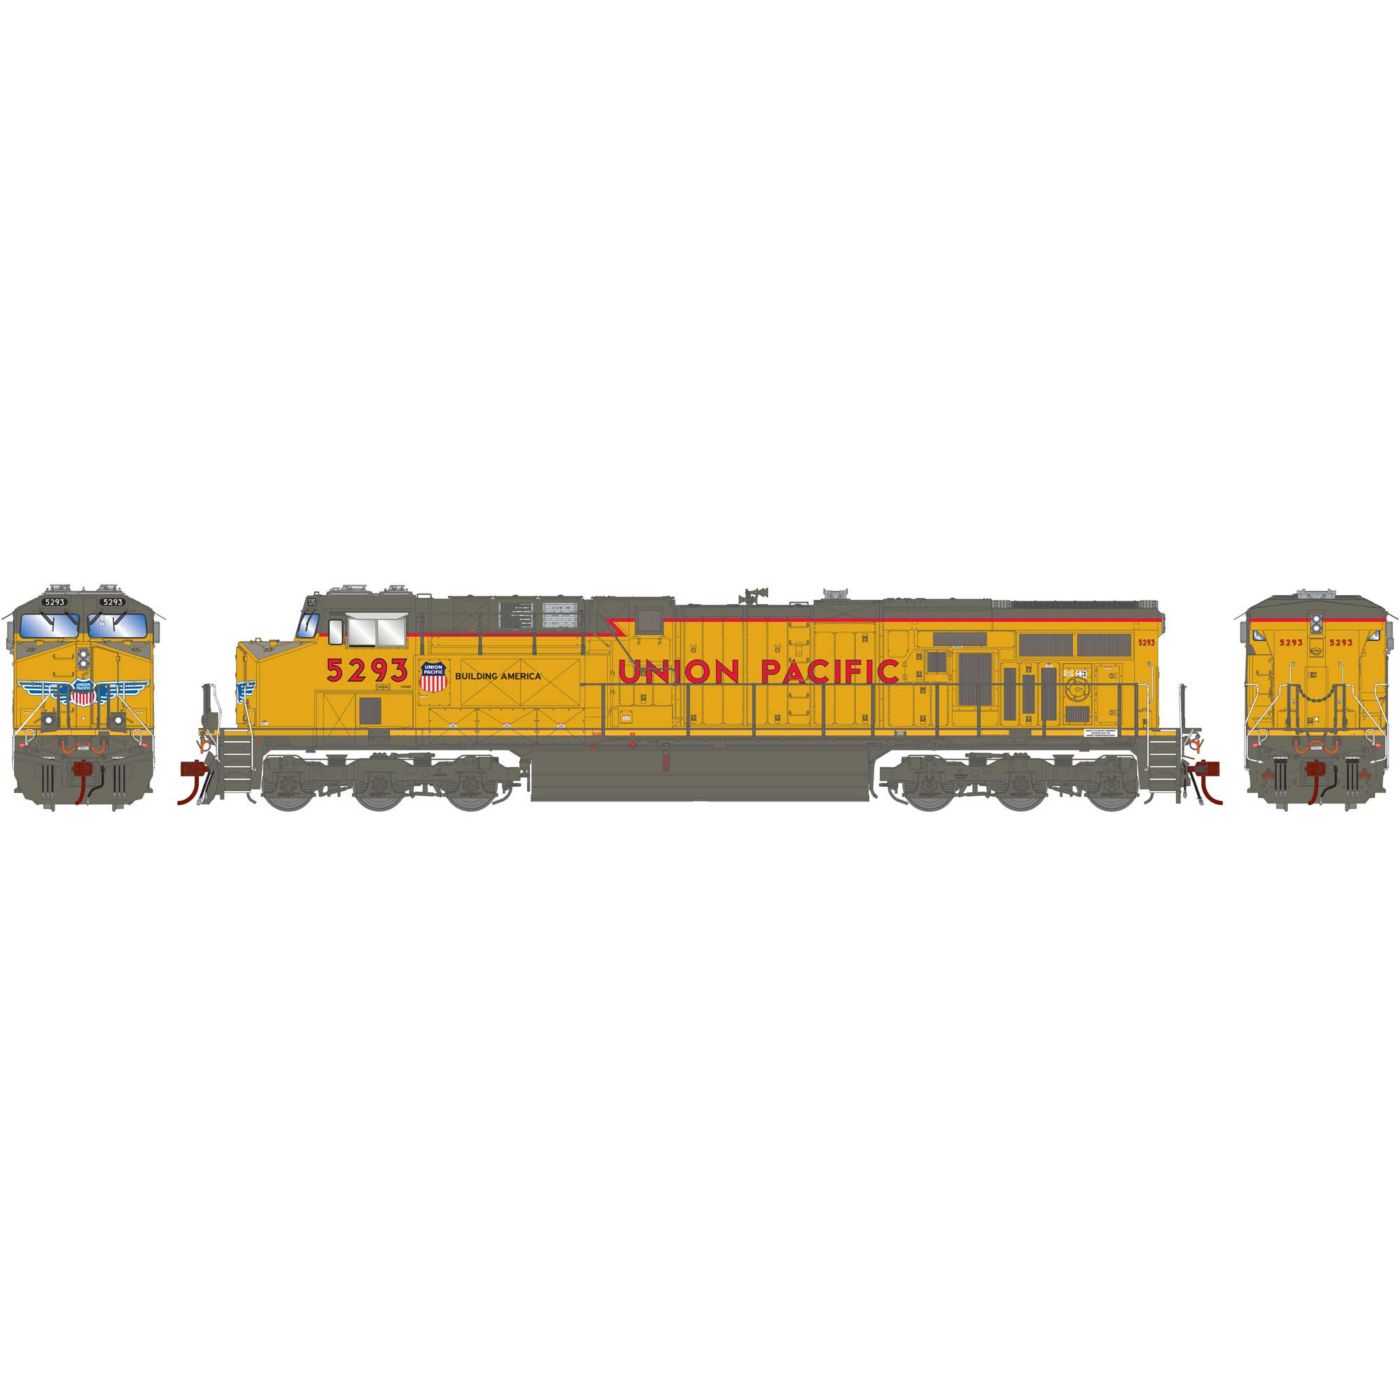 ATHG69796 Athearn HO ES44AC with DCC & Sound UP with PTC #5433 